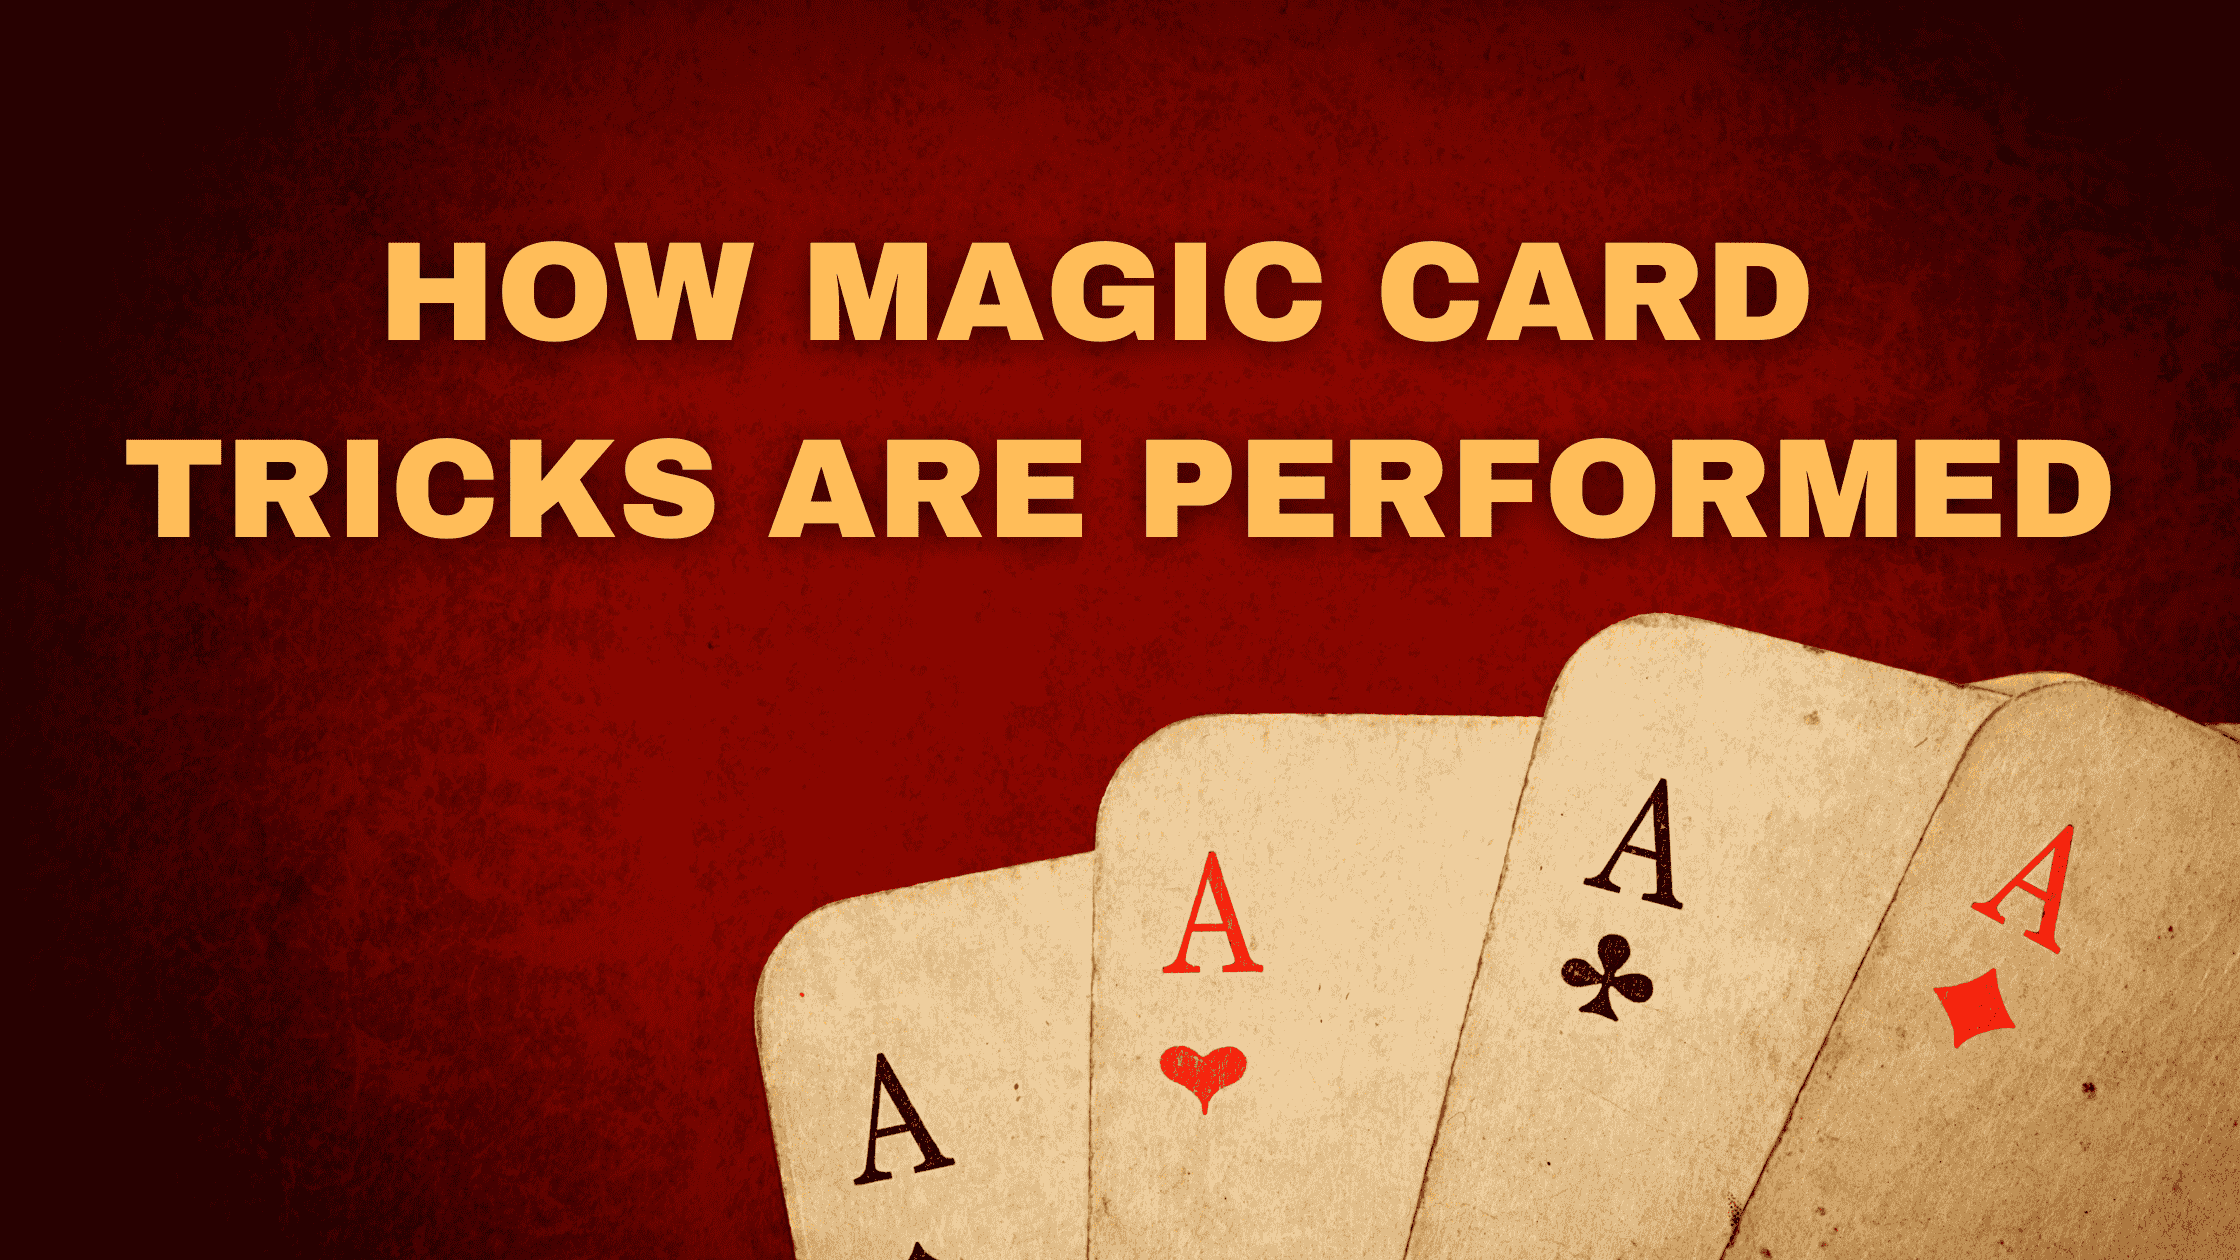 How Magic Card Tricks Are Performed